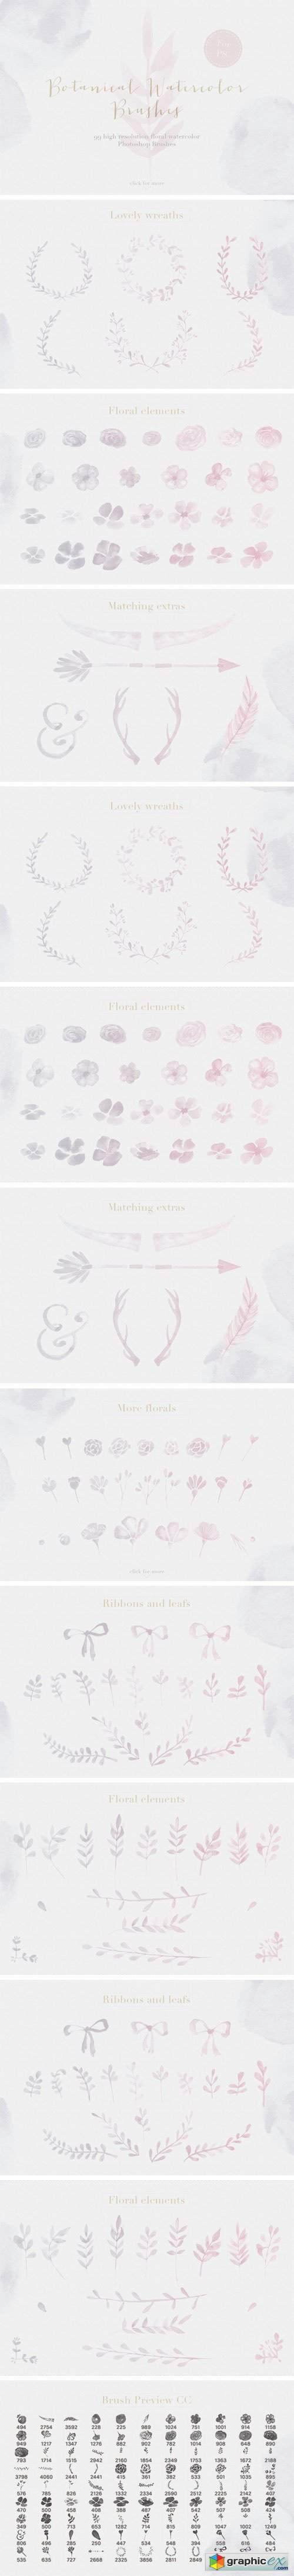 Floral Watercolor Photoshop Brushes